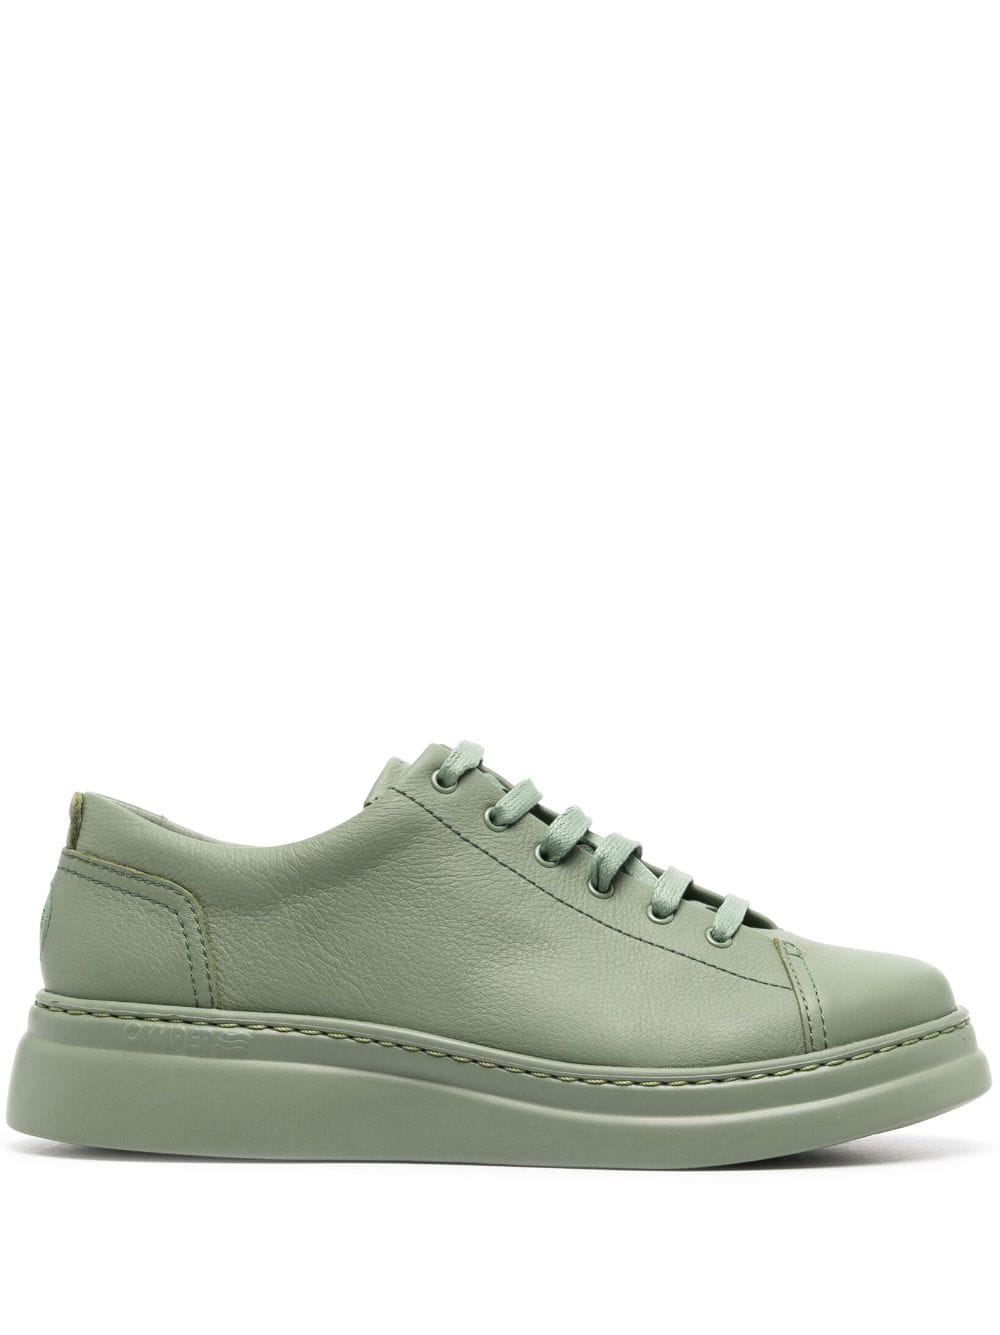 Camper lace-up leather sneakers - Green von Camper